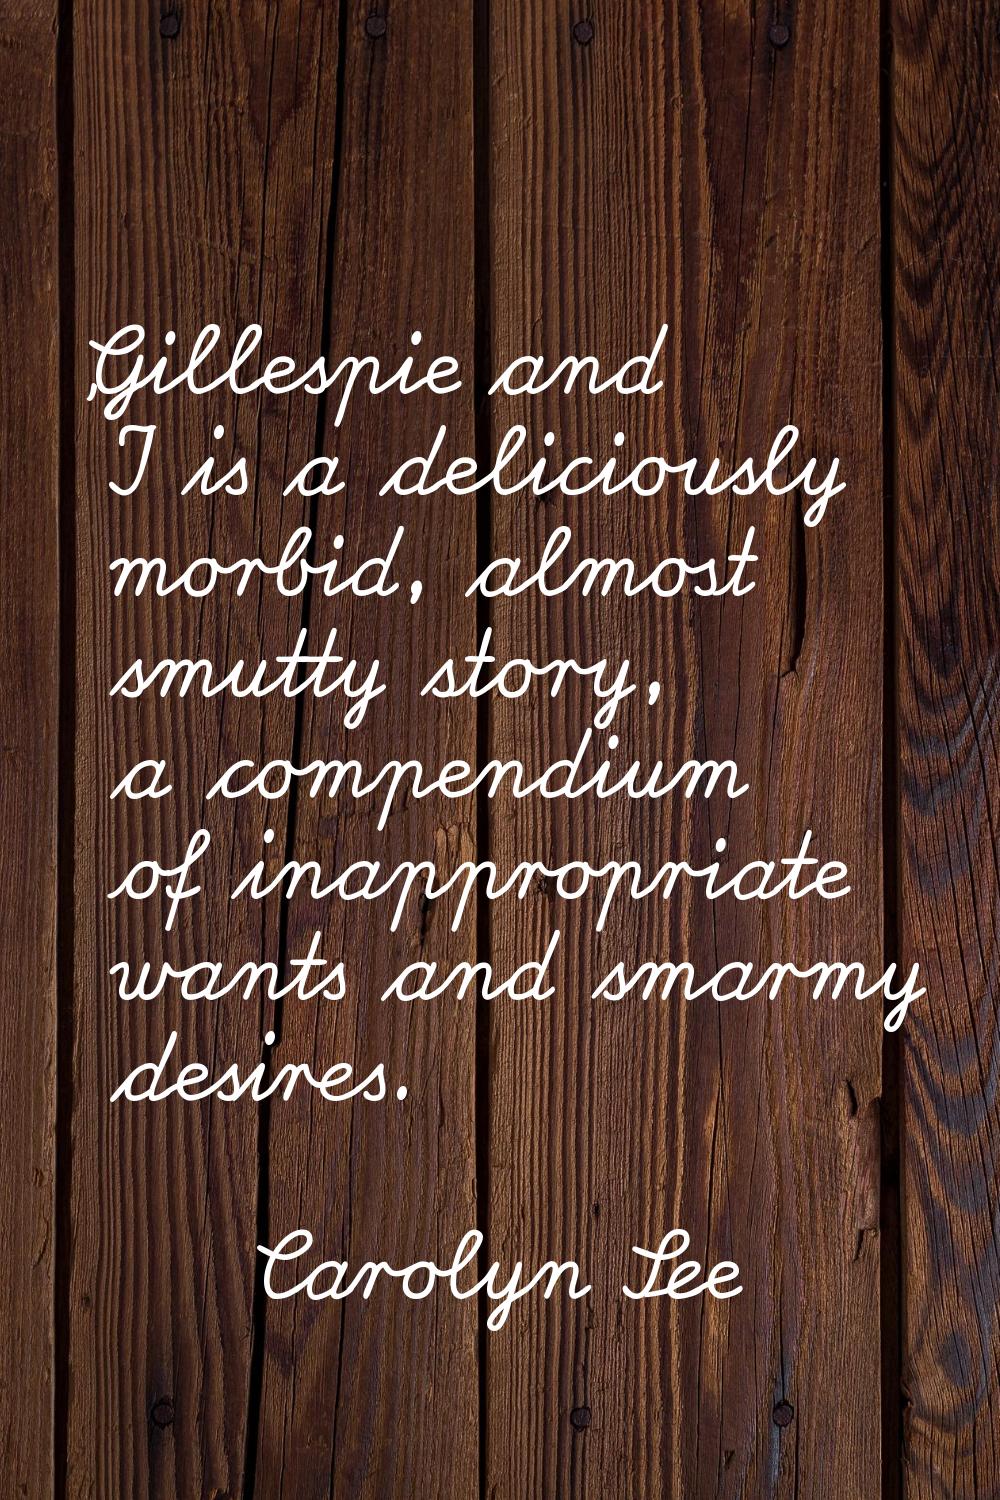 'Gillespie and I' is a deliciously morbid, almost smutty story, a compendium of inappropriate wants